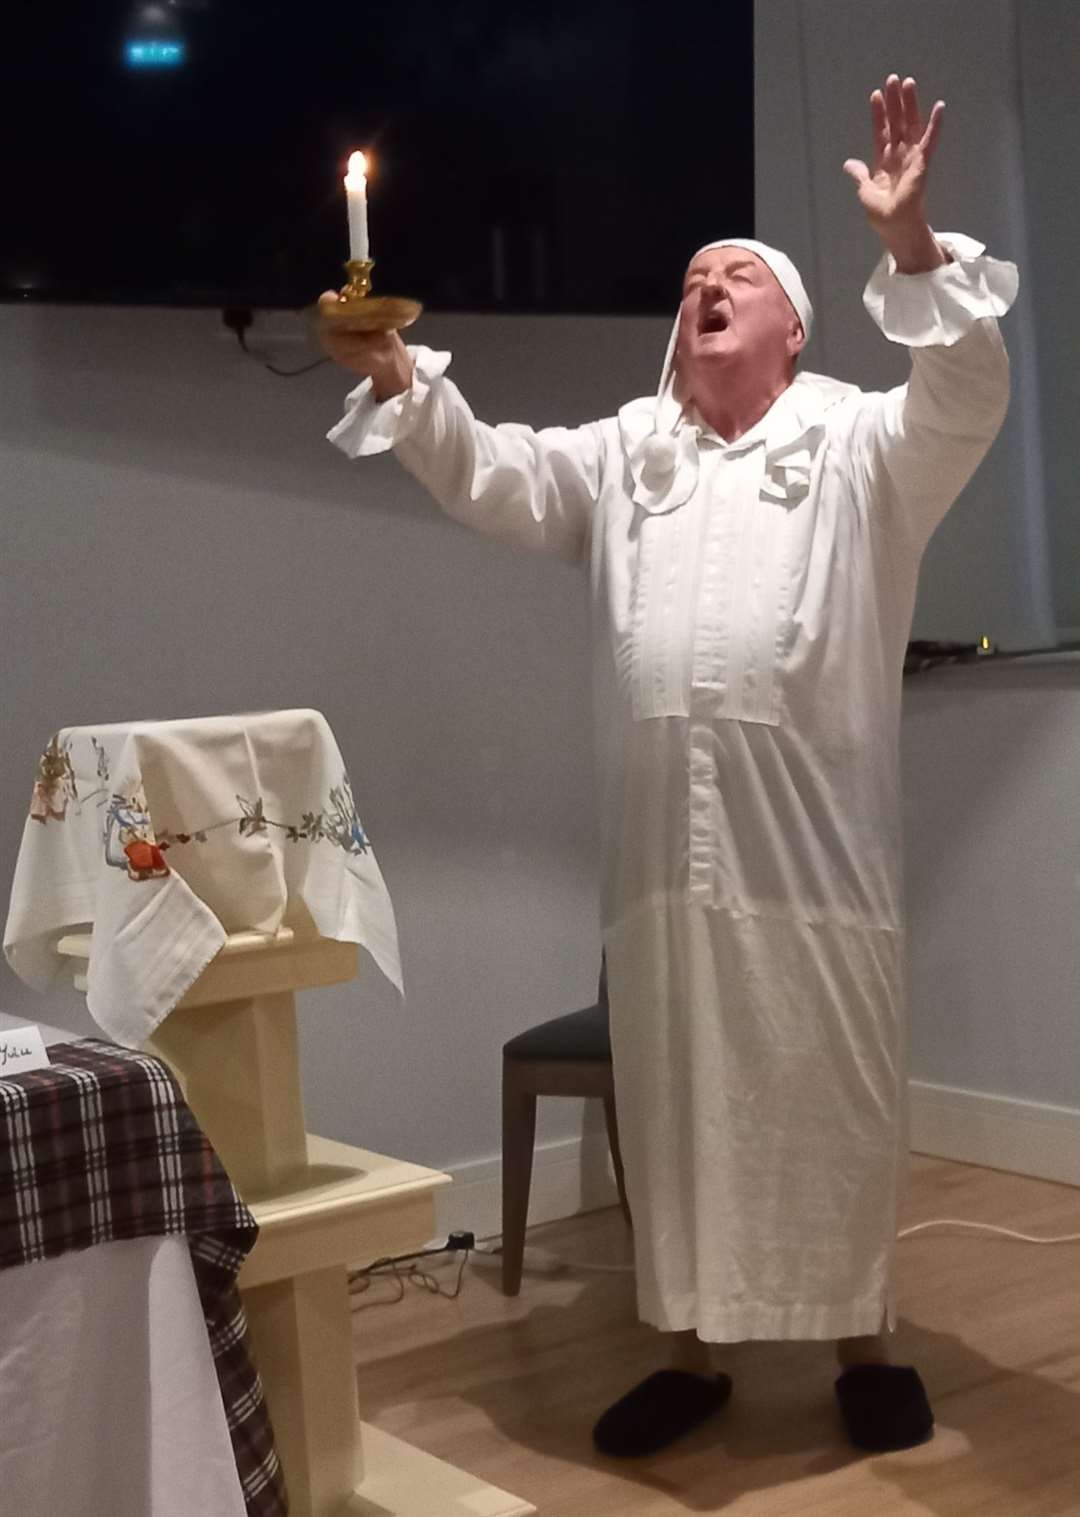 Star turn Willie Mackay in full flow, reciting the 101 lines of Burns’ famous satire Holy Willie’s Prayer.